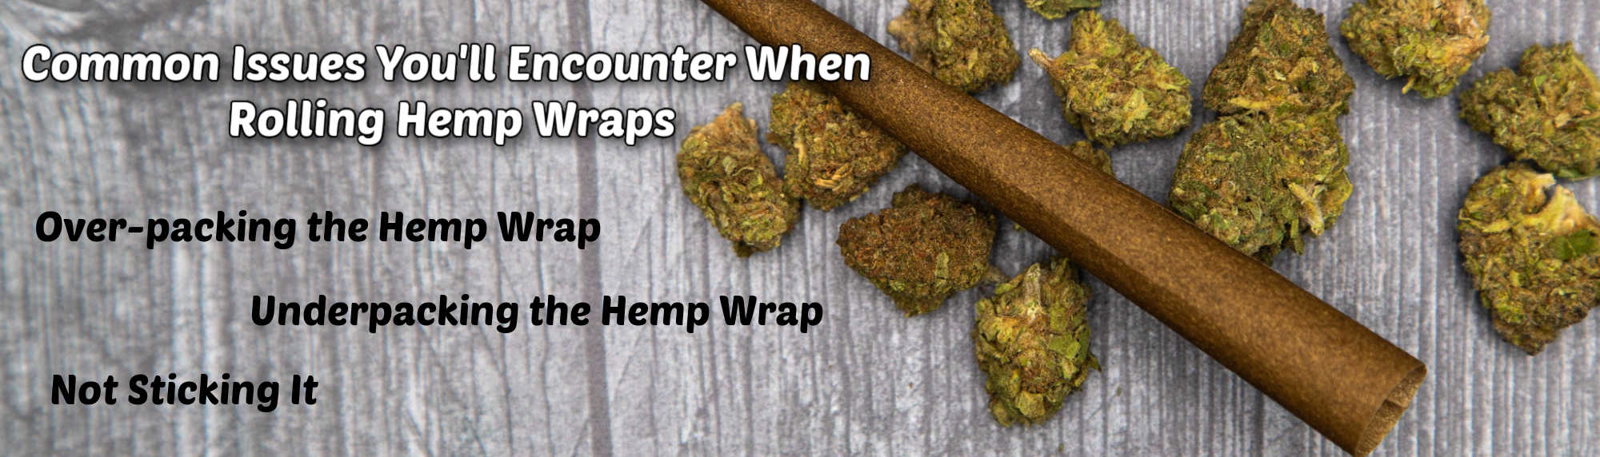 image of common issues youll will encounter when rolling hemp